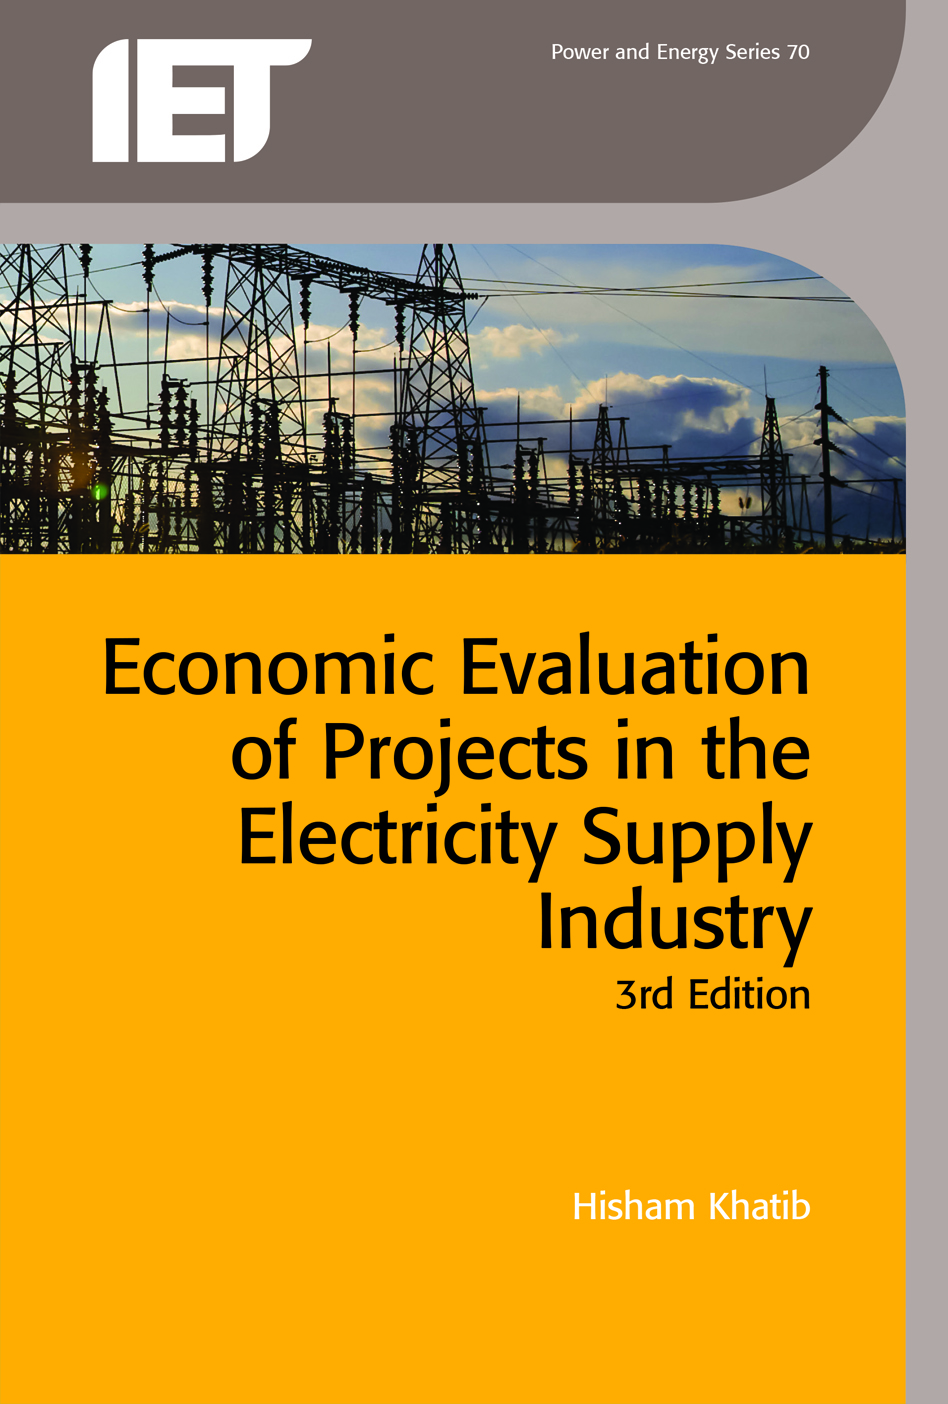 Economic Evaluation of Projects in the Electricity Supply Industry, 3rd Edition